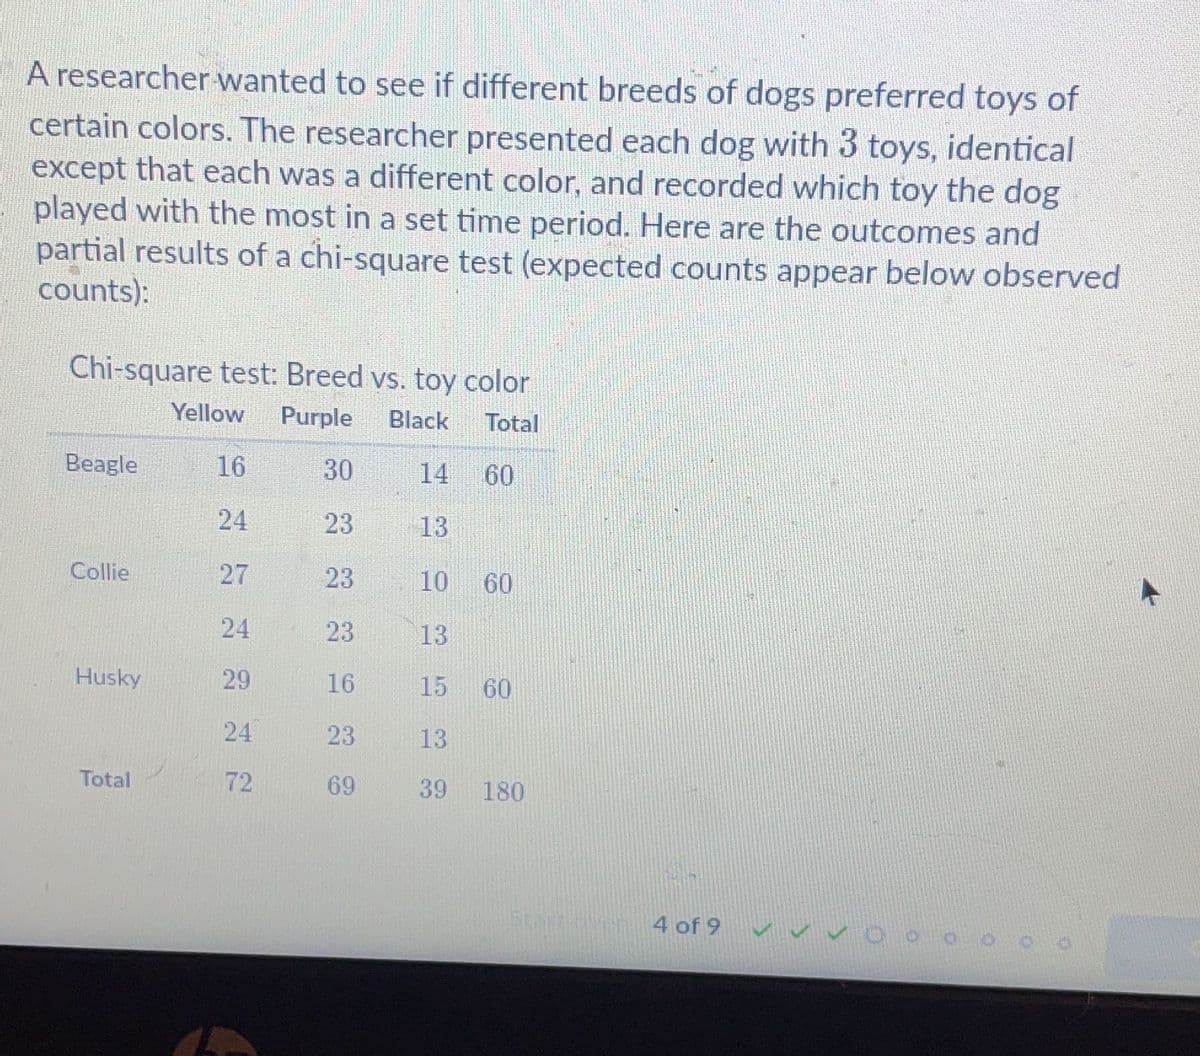 A researcher wanted to see if different breeds of dogs preferred toys of
certain colors. The researcher presented each dog with 3 toys, identical
except that each was a different color, and recorded which toy the dog
played with the most in a set time period. Here are the outcomes and
partial results of a chi-square test (expected counts appear below observed
counts):
Chi-square test: Breed vs. toy color
Yellow Purple Black Total
30
14 60
23
13
23
10 60
23
13
16
15 60
13
39
Beagle
Collie
Husky
Total
16
24
27
24
29
24
72
23
69
180
4 of 9
100
15